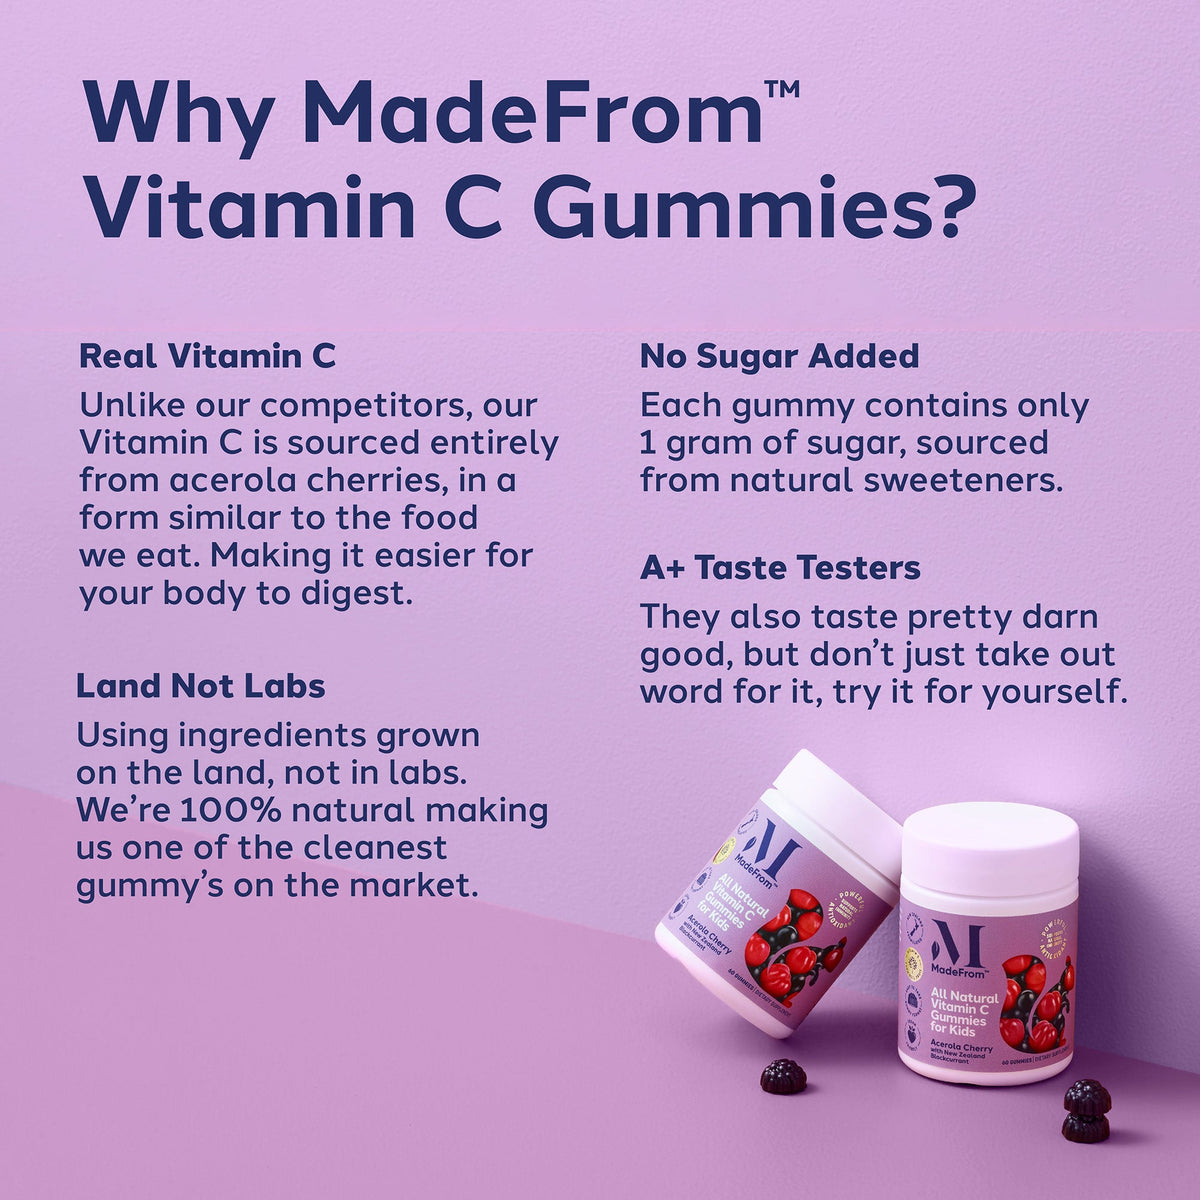 All Natural Vitamin C Gummies for Kids Subscription